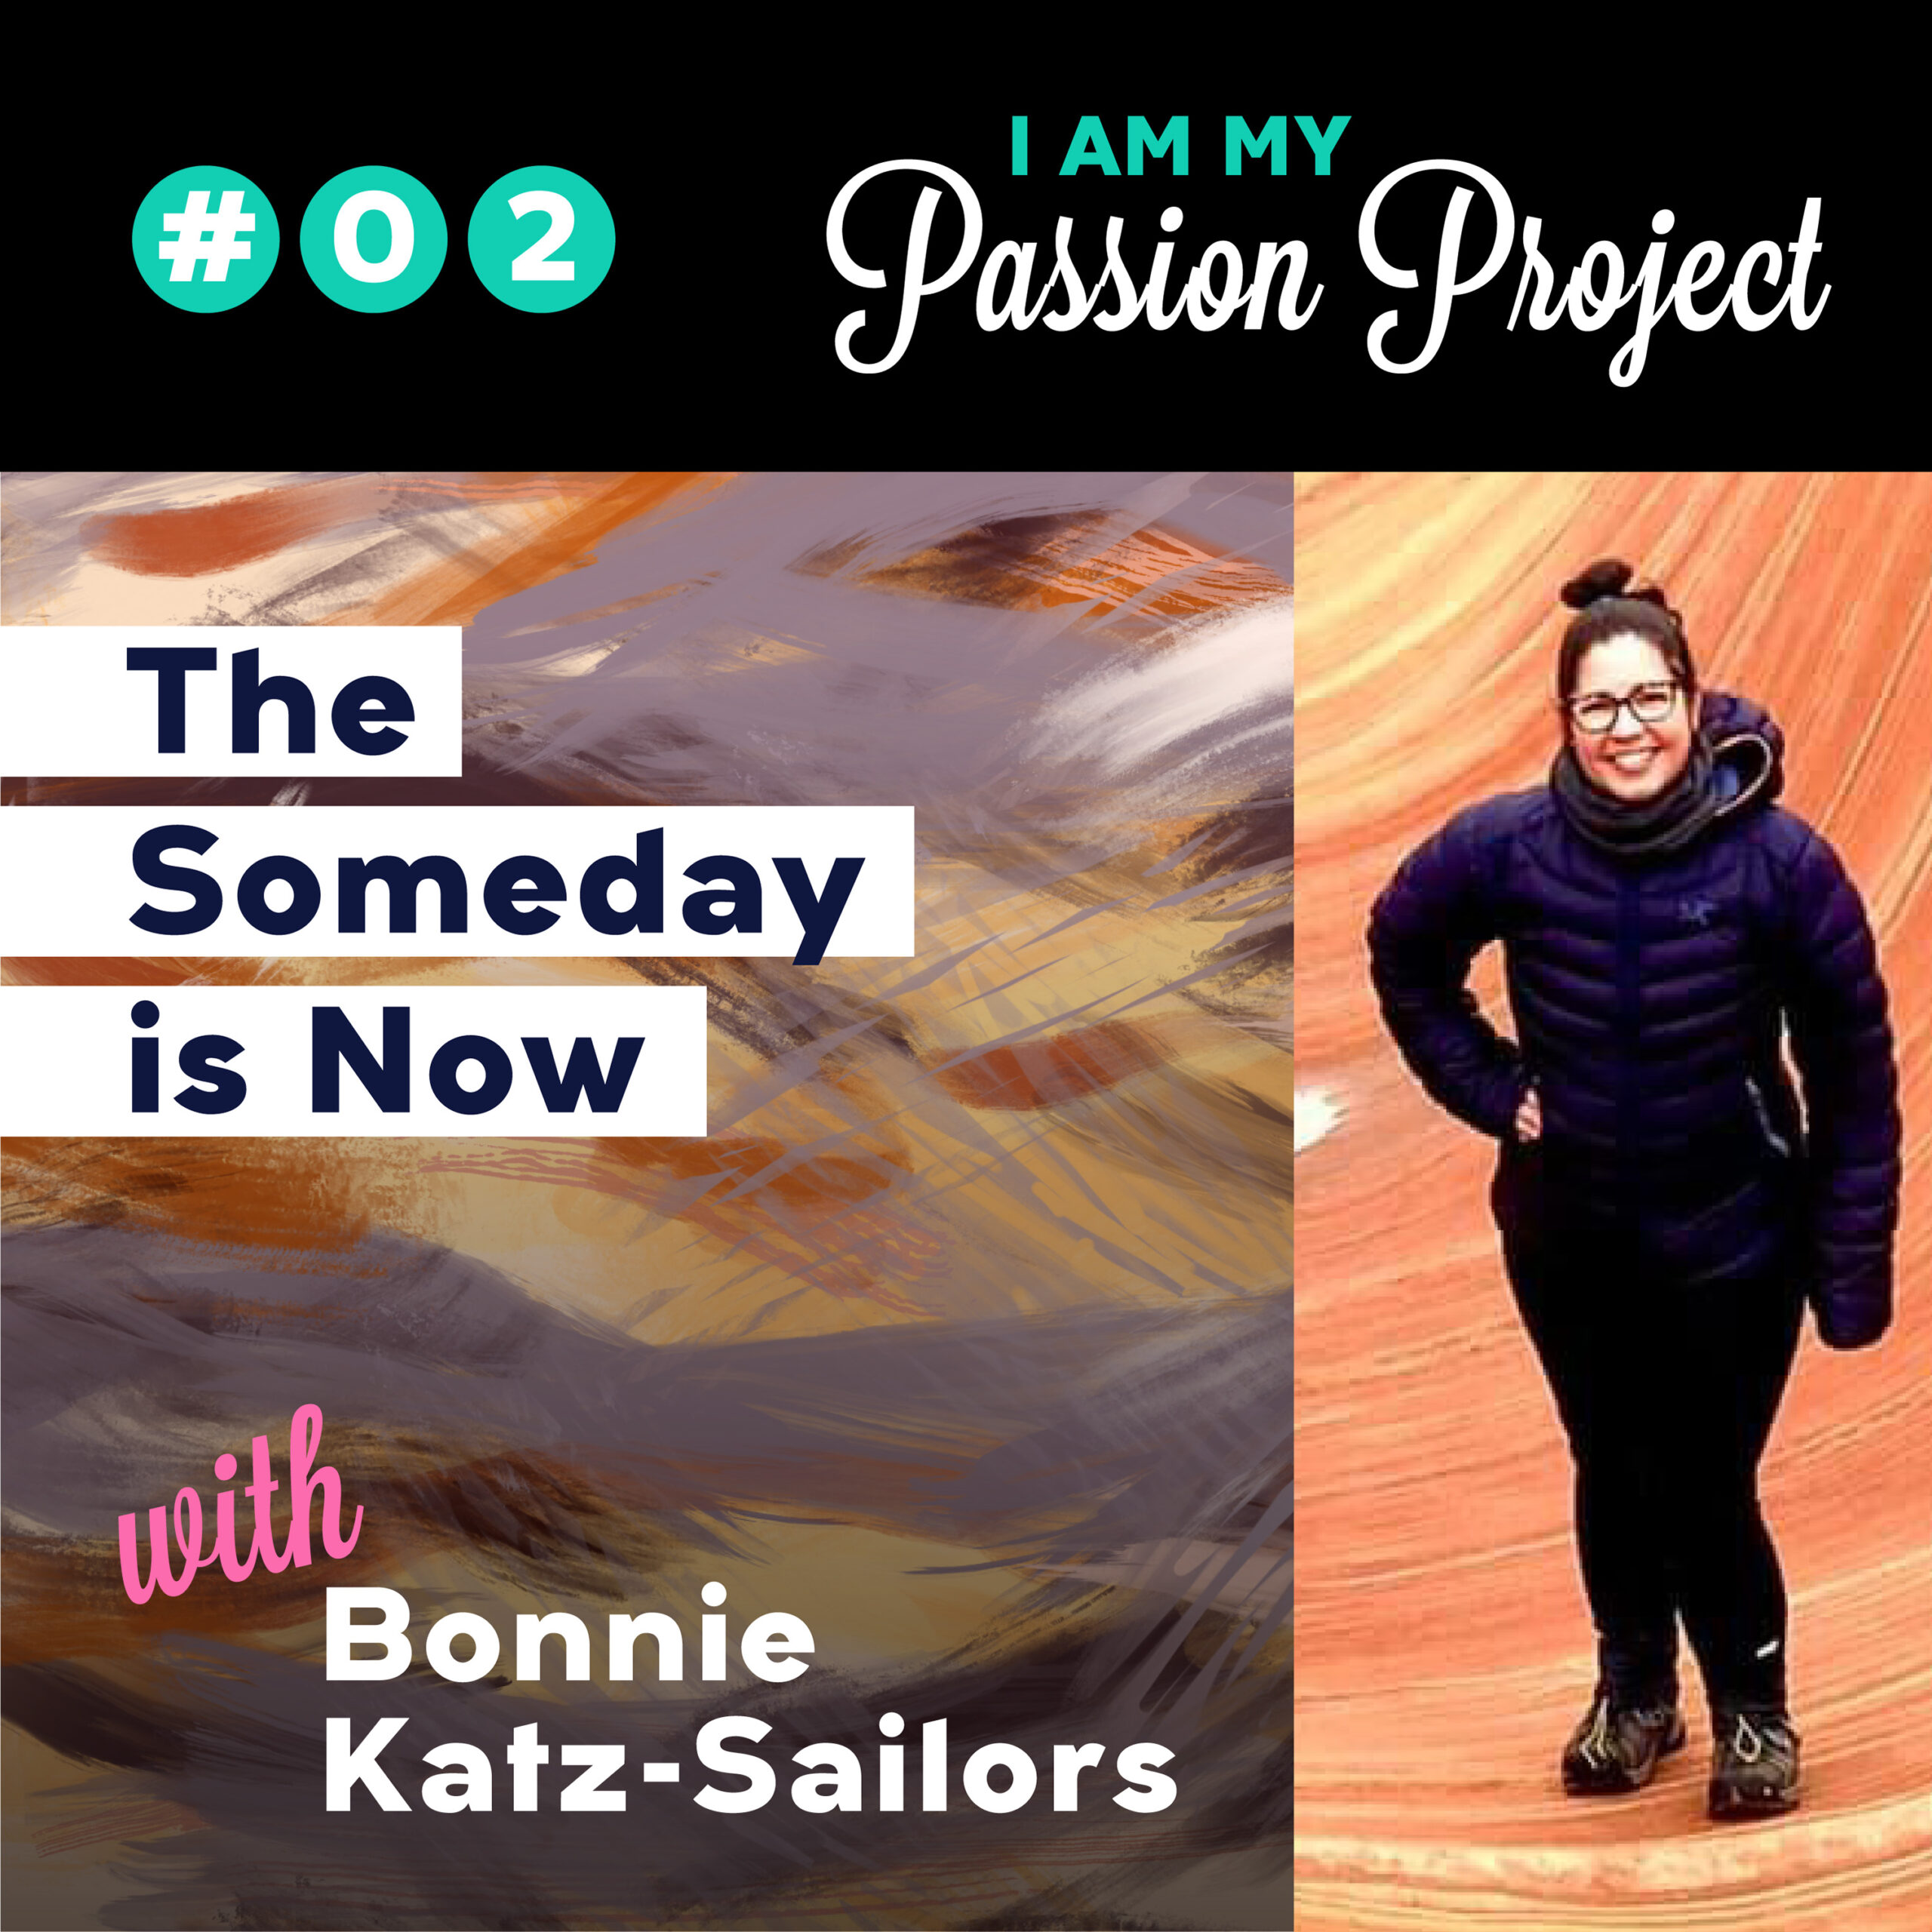 The Someday is Now, with Bonnie Katz Sailors